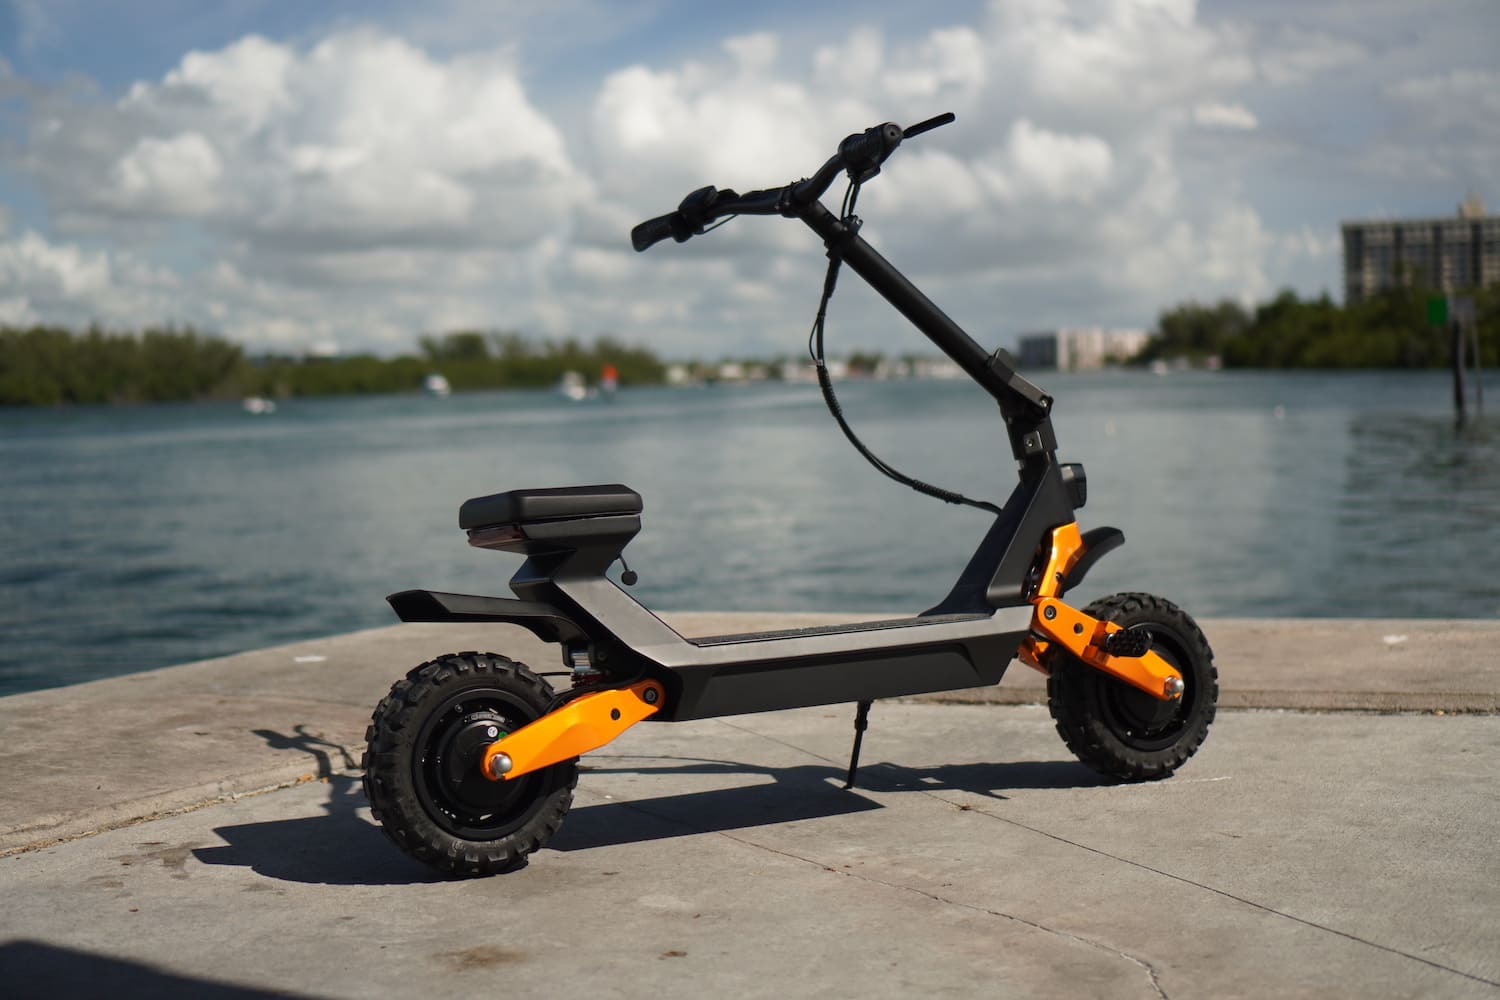 fiido-beast-review-electric-scooter-7.jpg?quality=82&strip=all